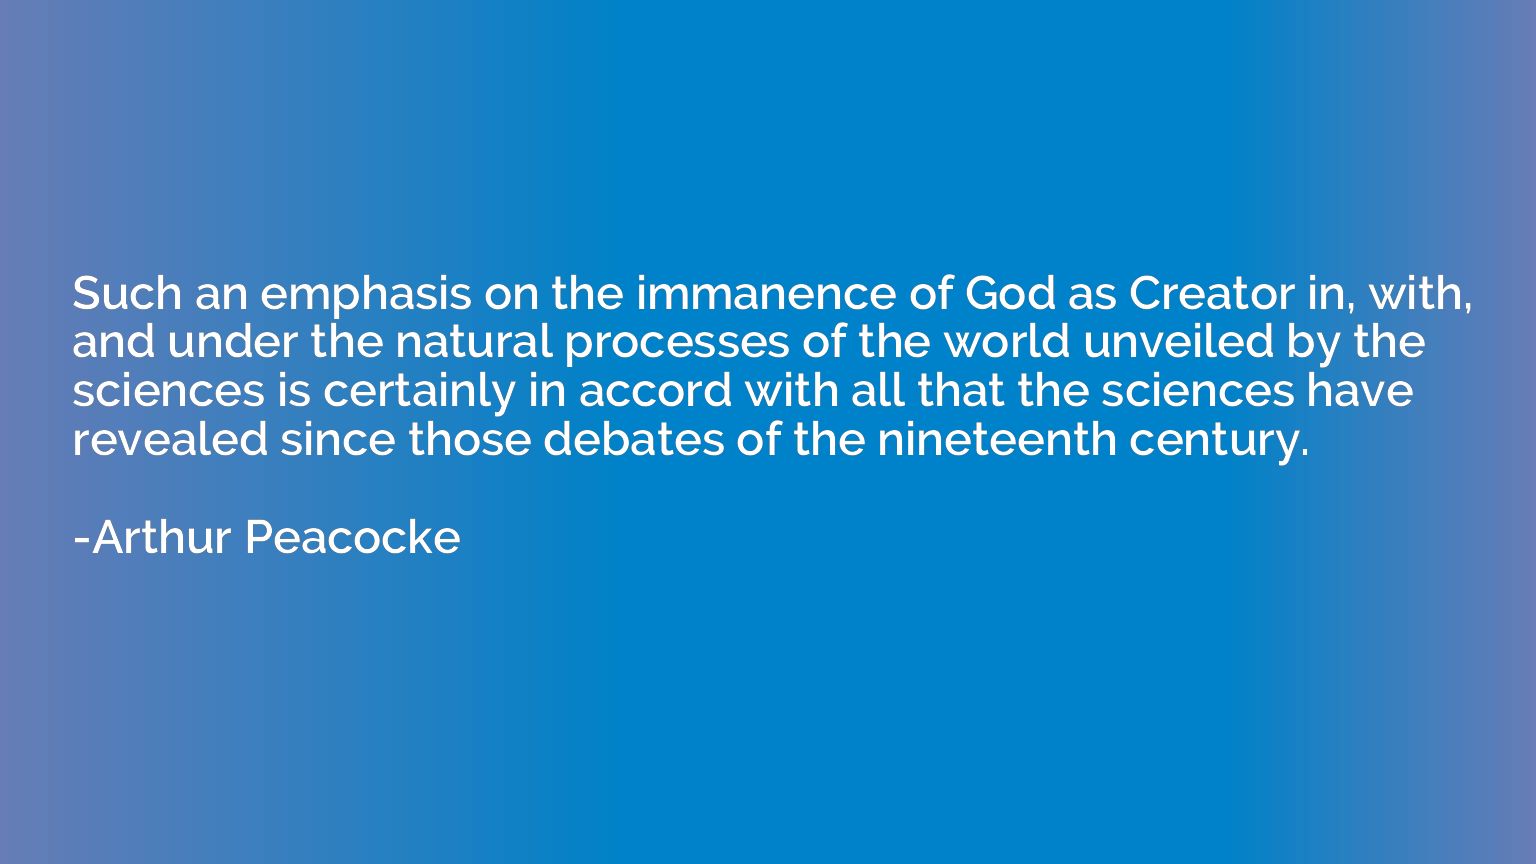 Such an emphasis on the immanence of God as Creator in, with